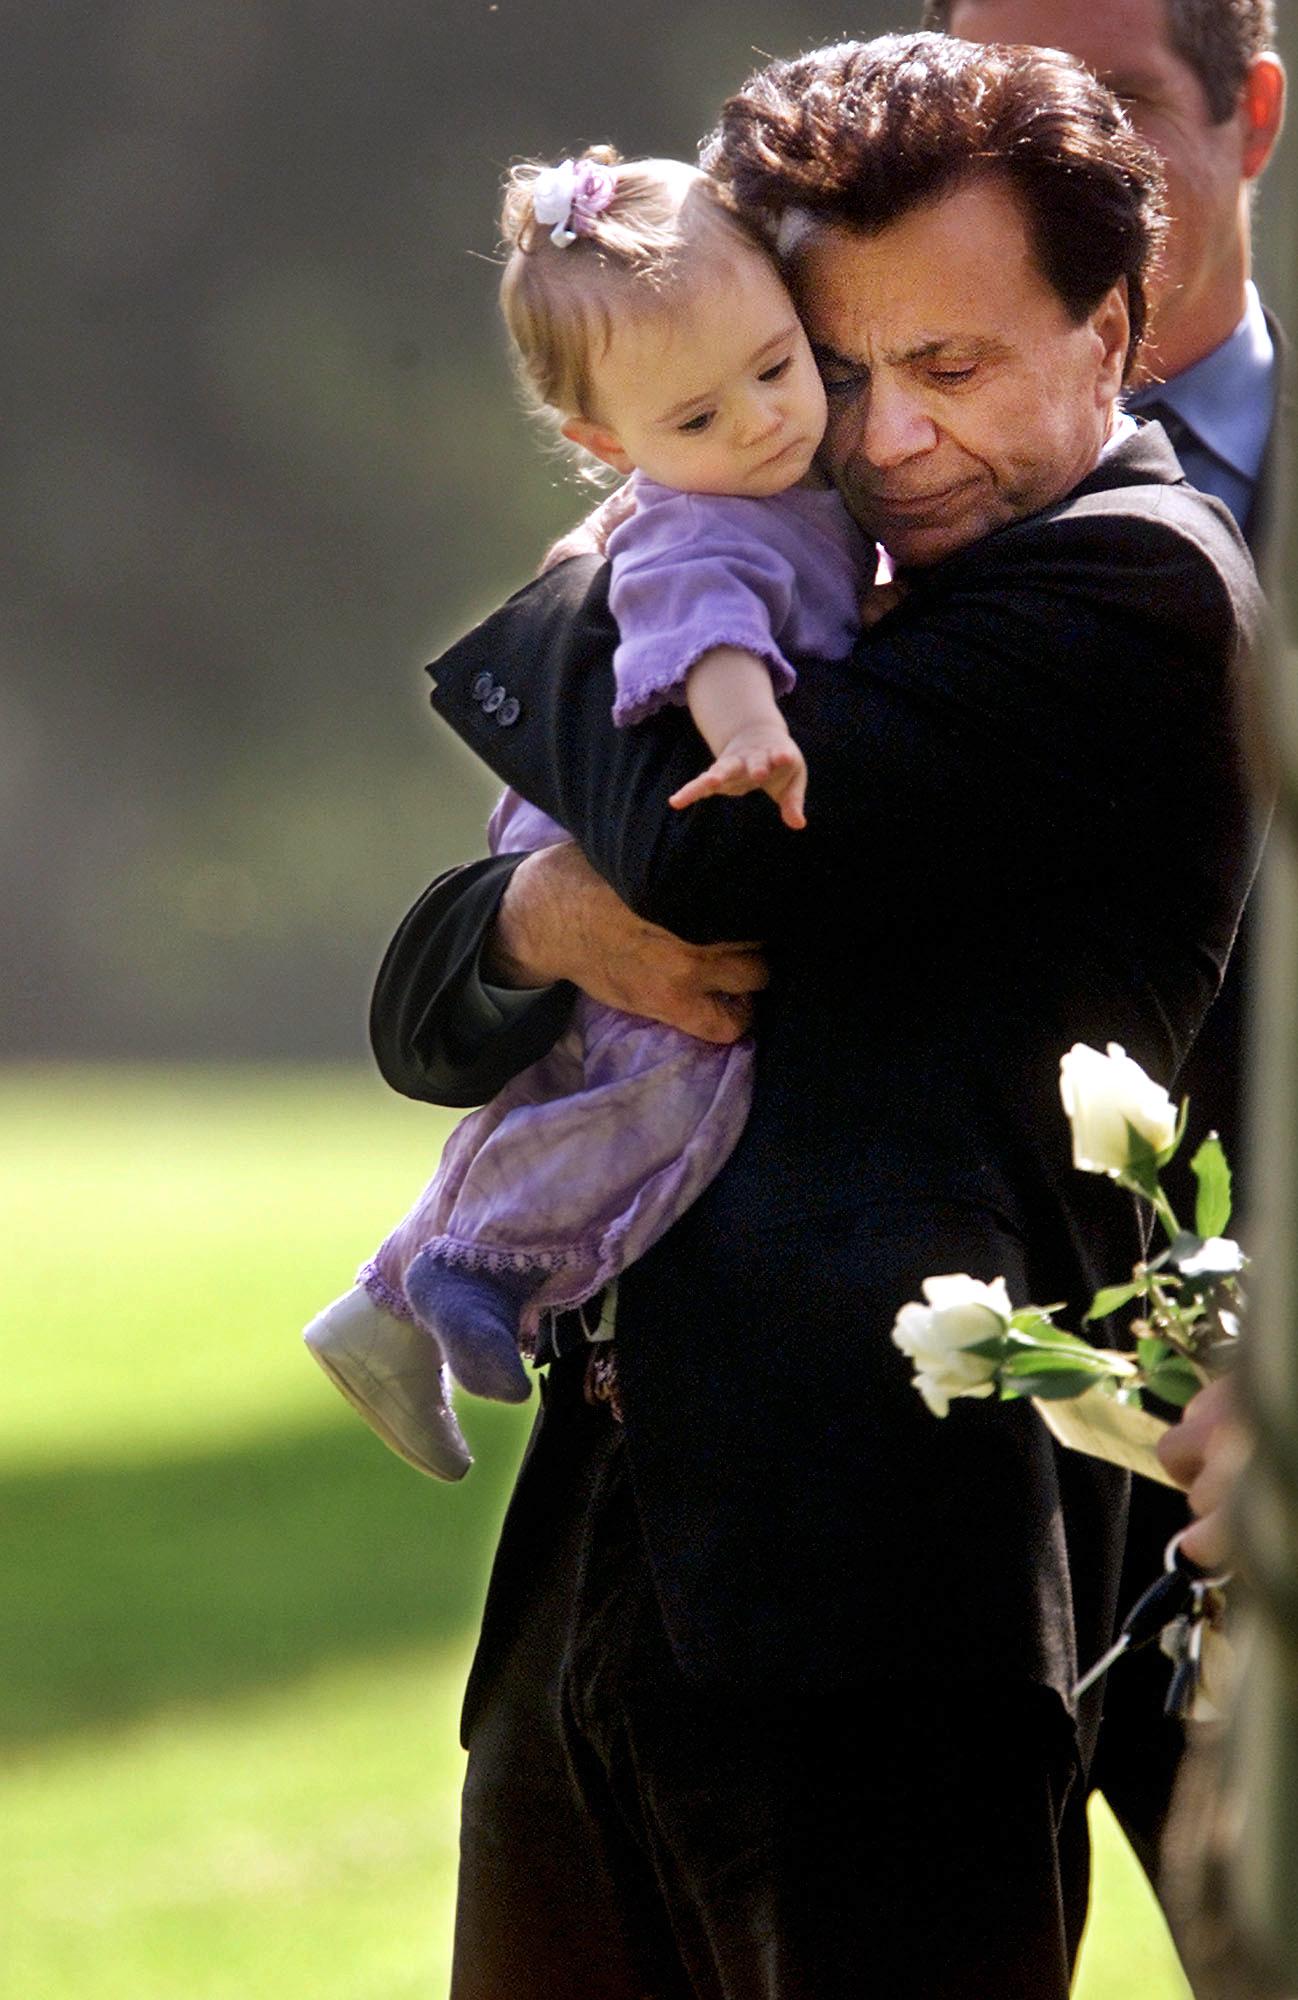 Actor Robert Blake, hugs his 11-month-old daugther Rose Lenore Sophie Blake, during a brief funeral ceremony of his wife Bonny Lee Bakley in Los Angeles, May 25, 2001 | Source: Getty Images